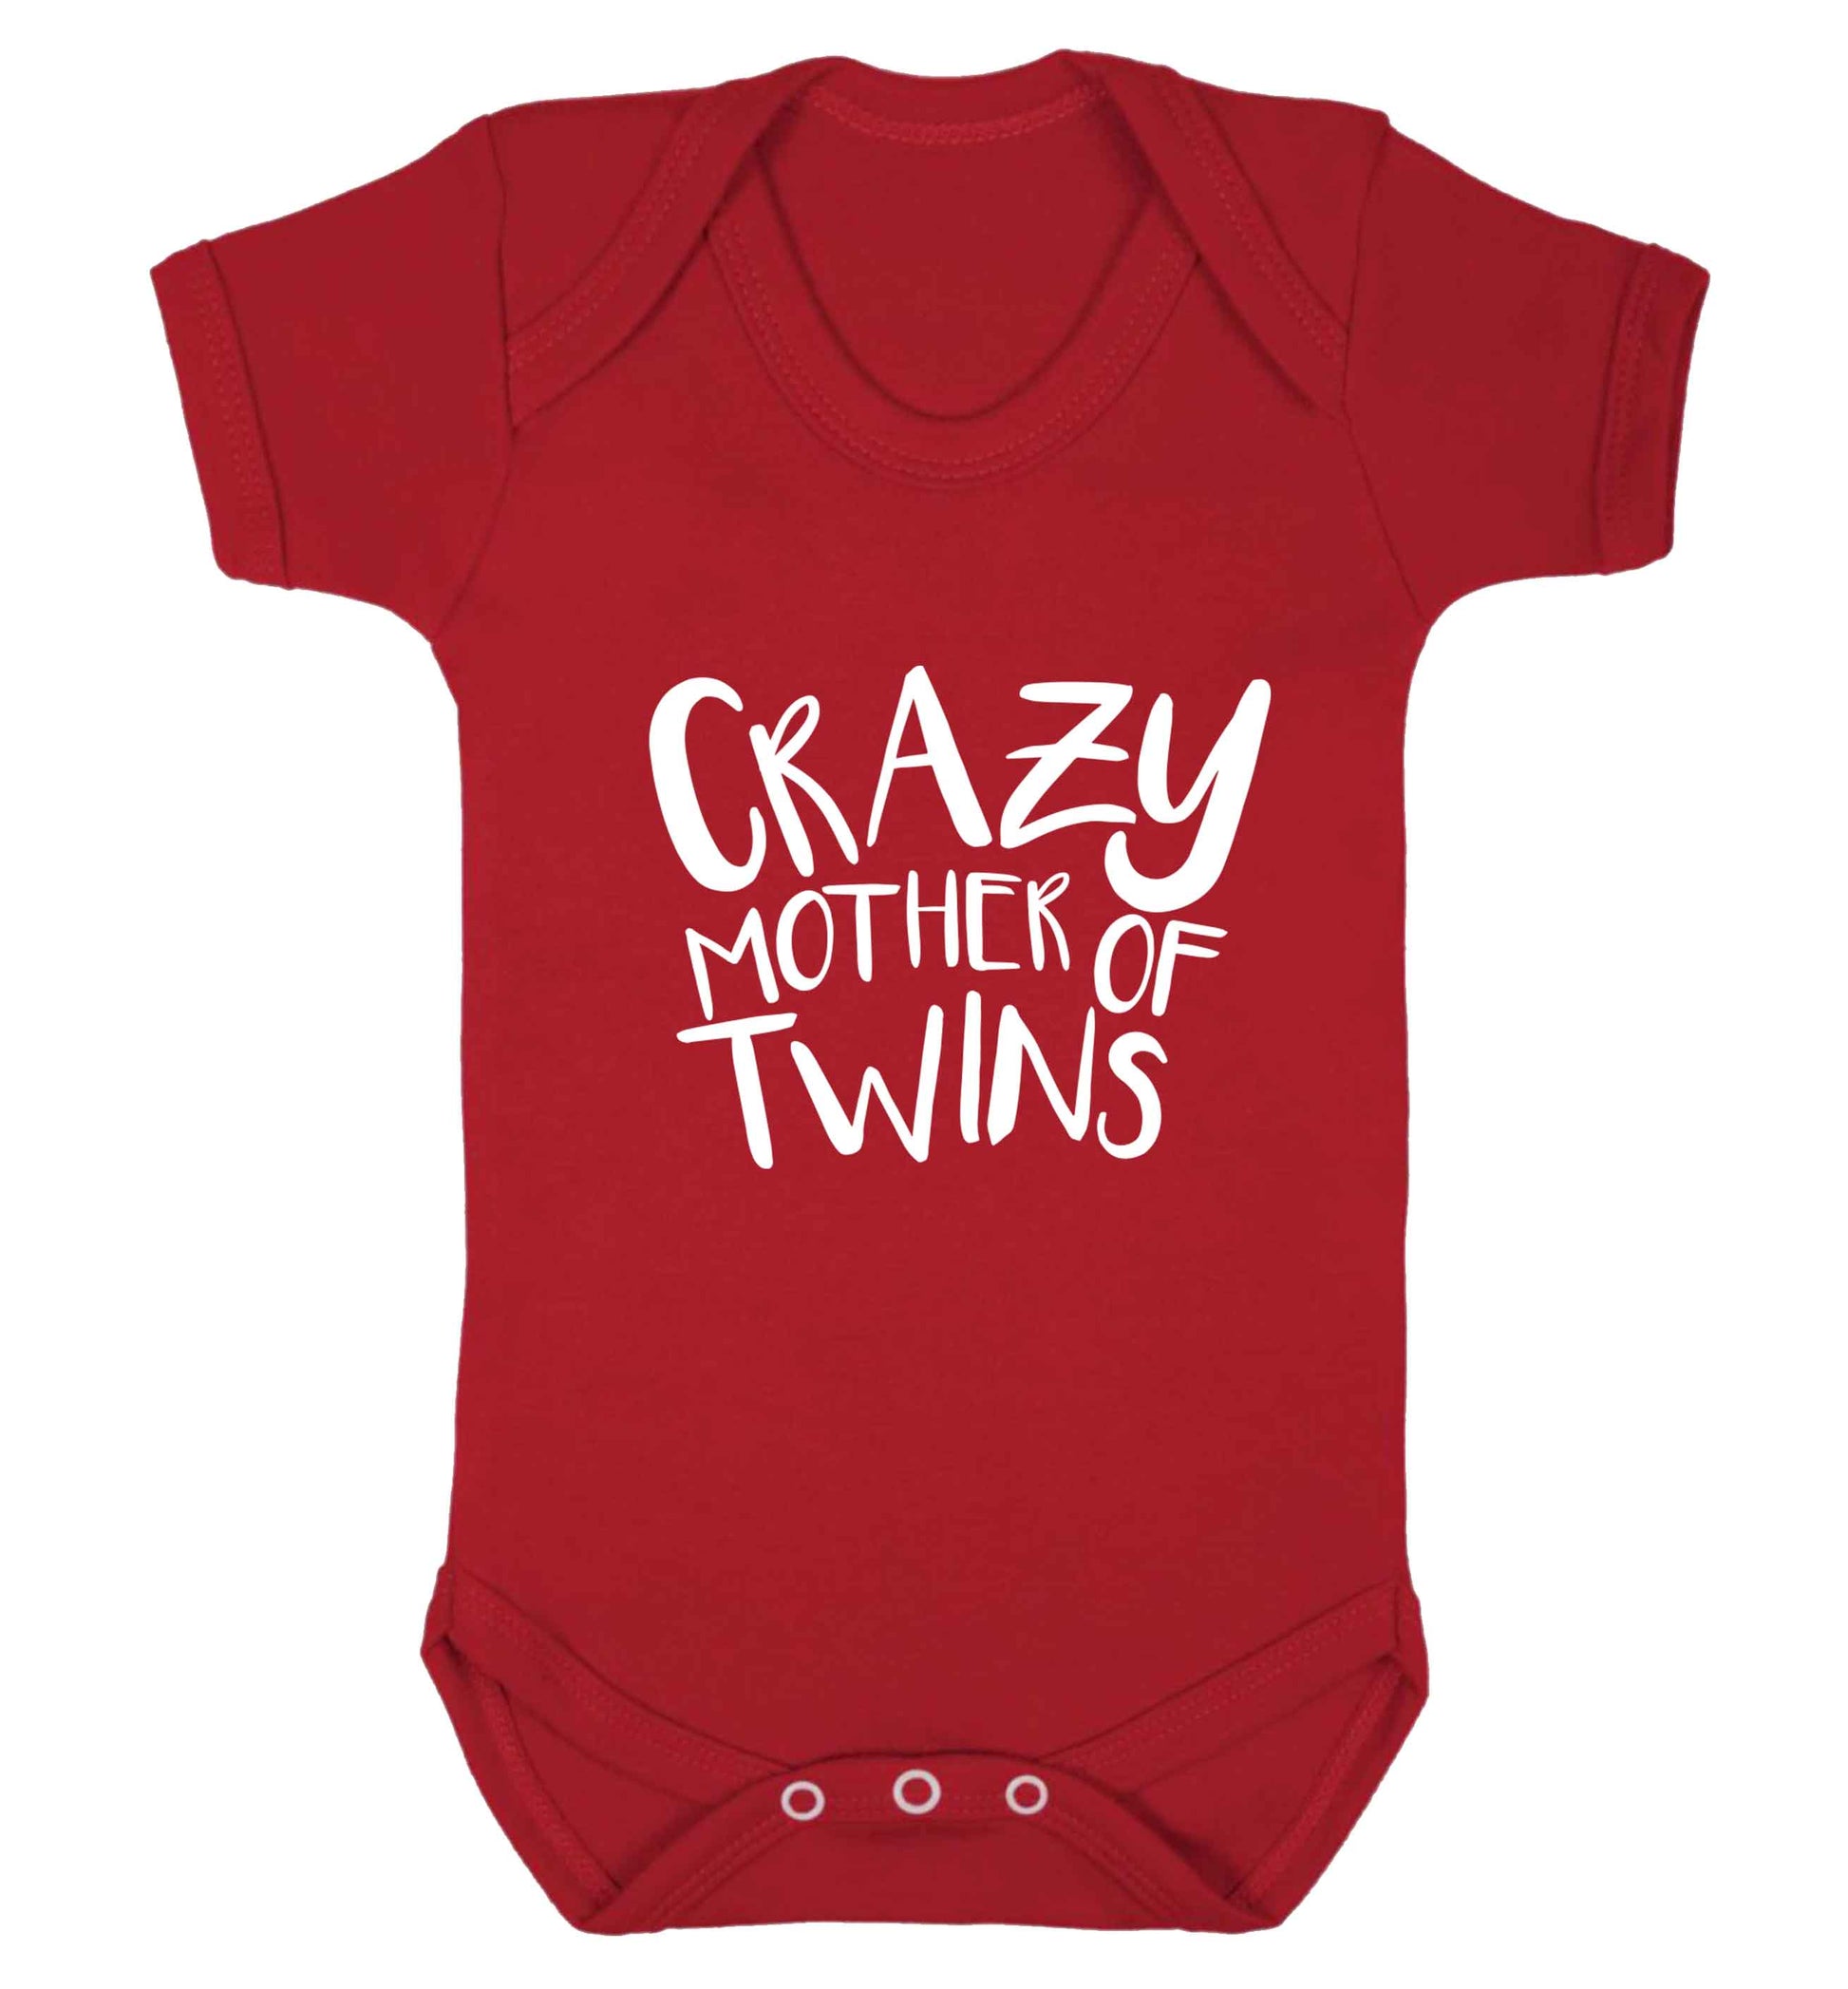 Crazy mother of twins baby vest red 18-24 months